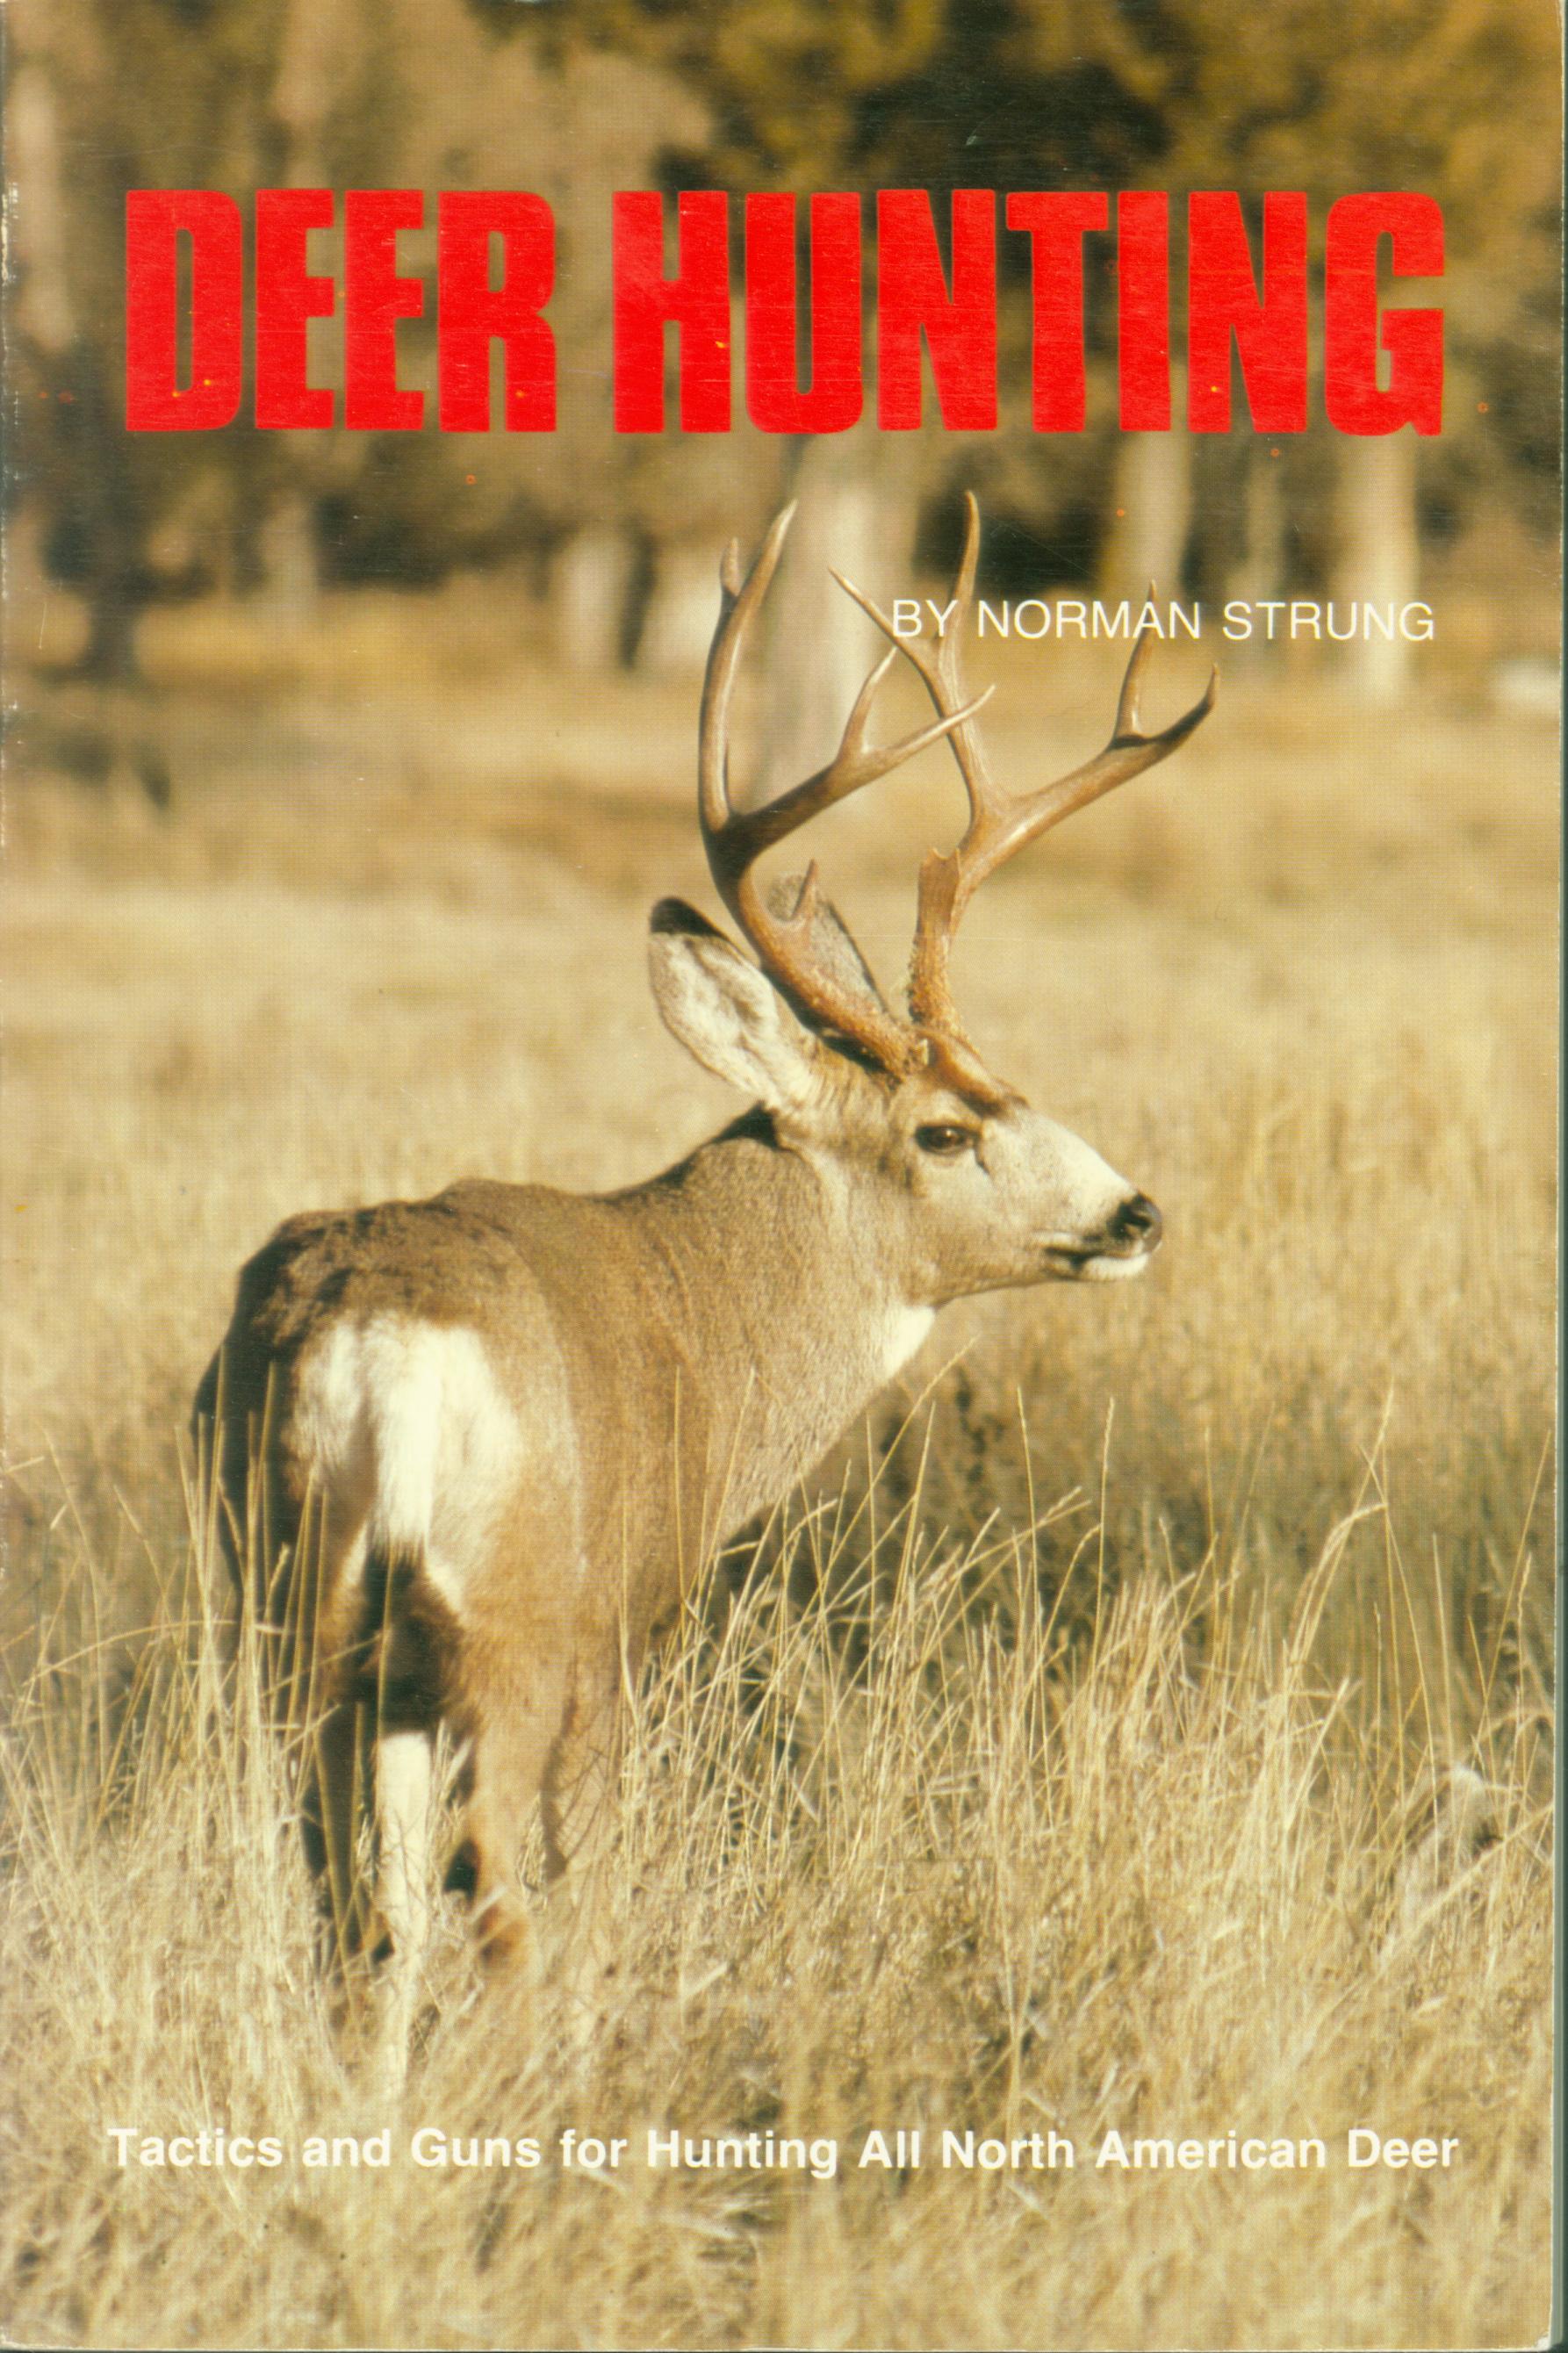 DEER HUNTING: tactics and guns for hunting all North American deer. 